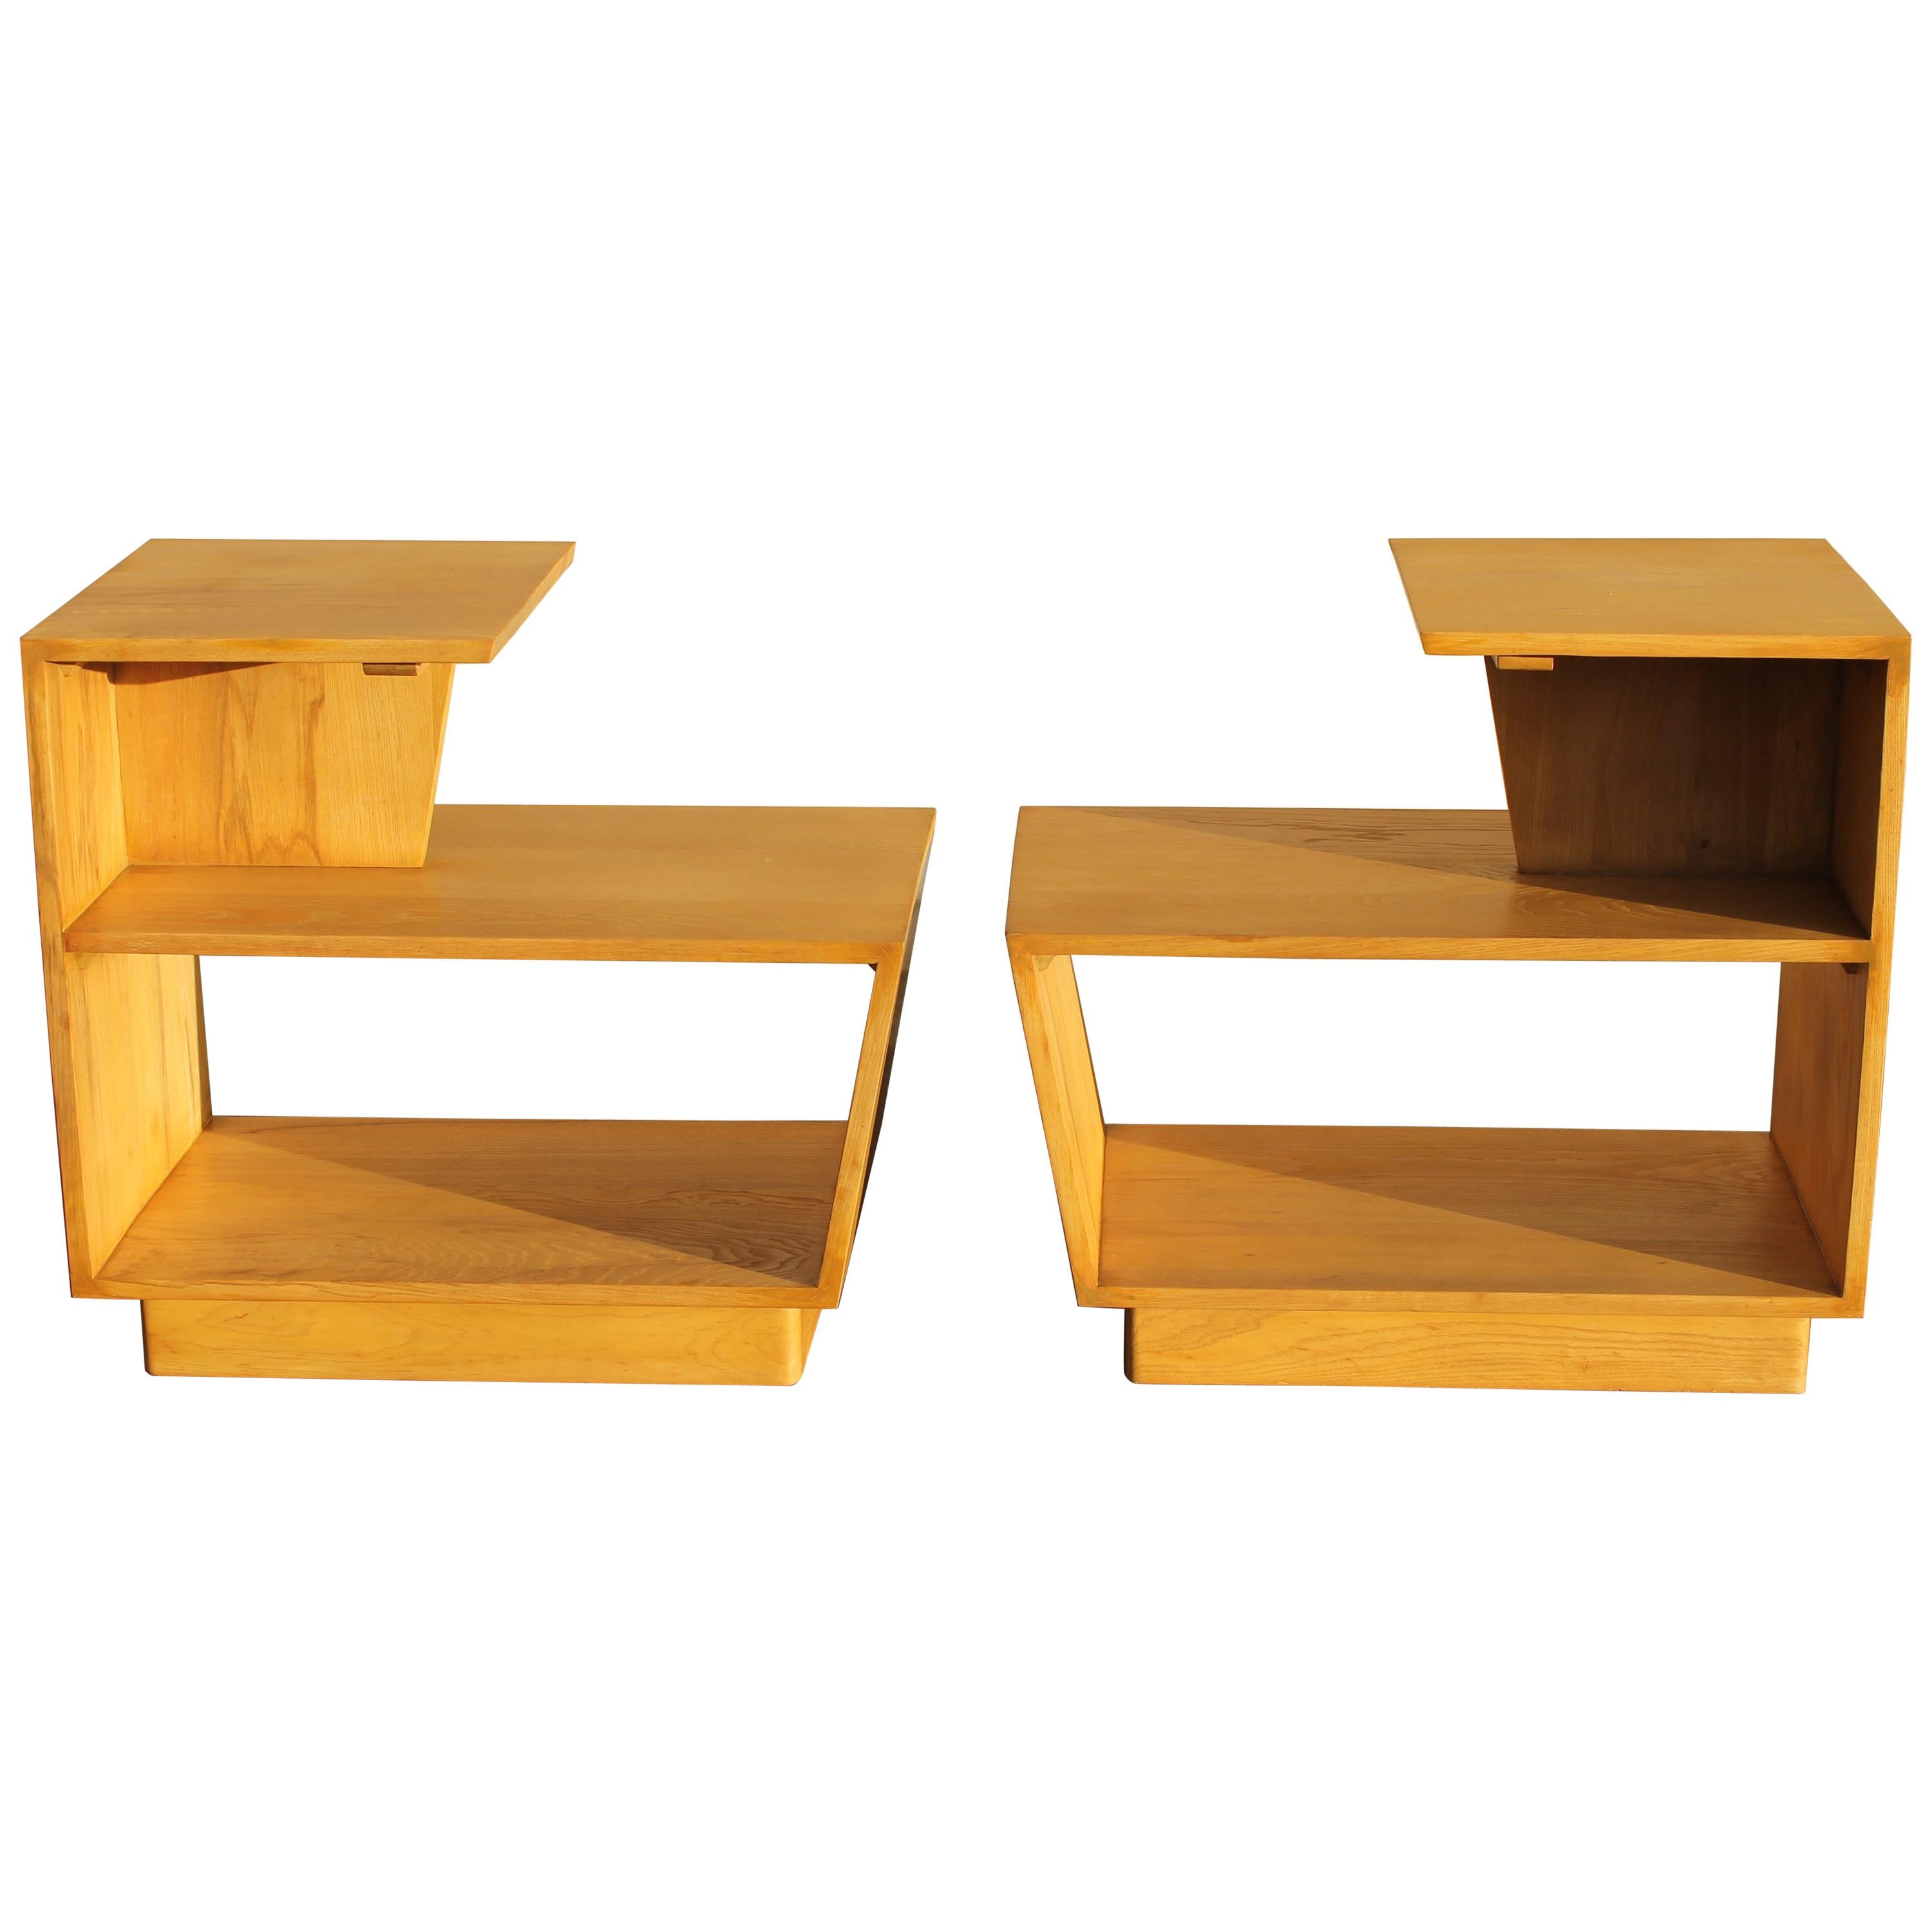 Pair of Moderne End Tables